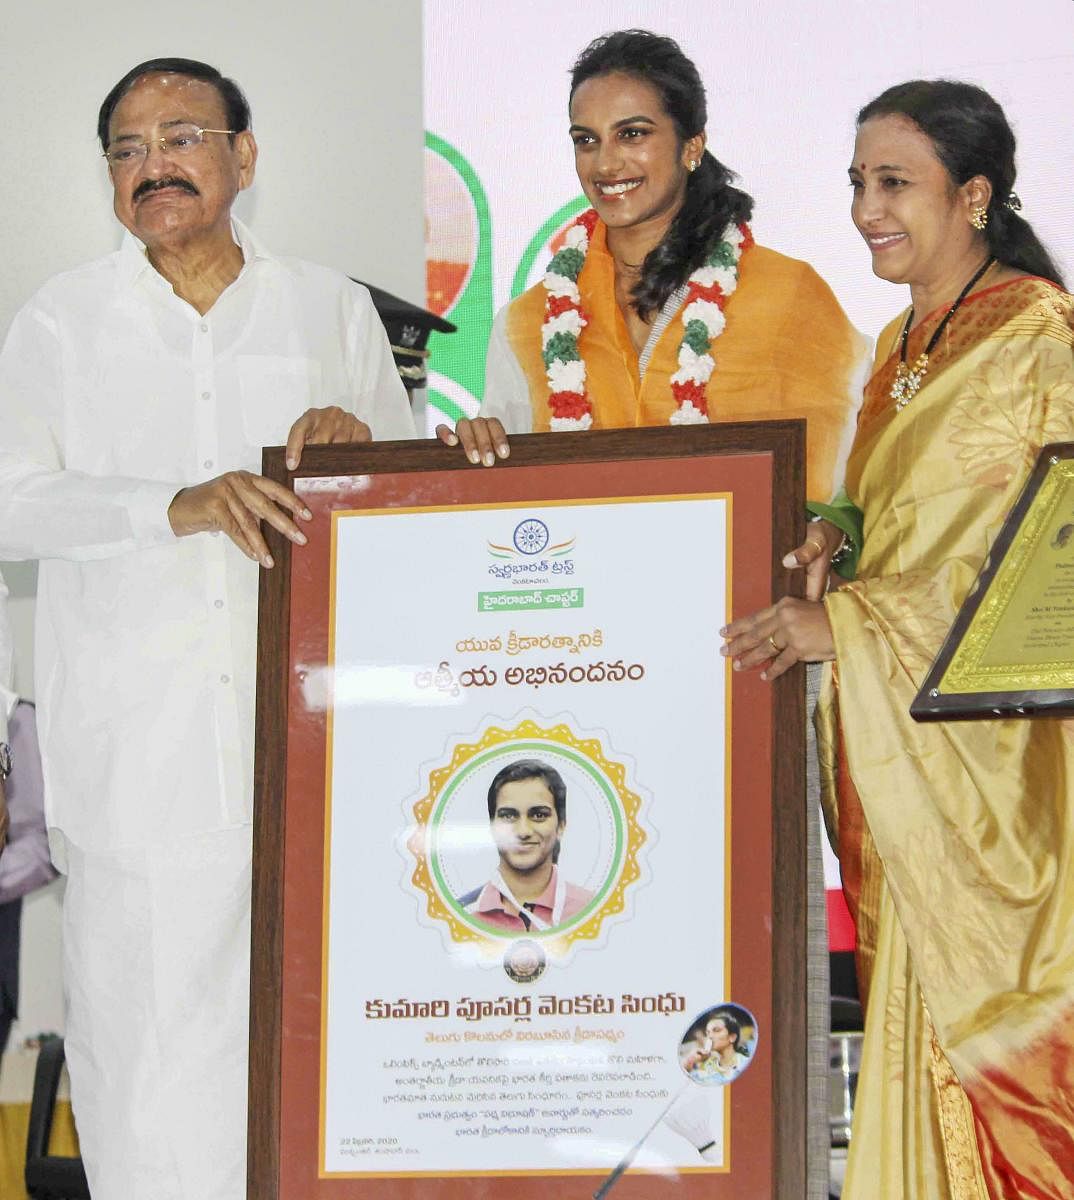 At another event organised by Swarna Bharat Trust near here, Naidu felicitated three Padma Awardees from Telangana - ace badminton player P V Sindhu. Credit: PTI Photo